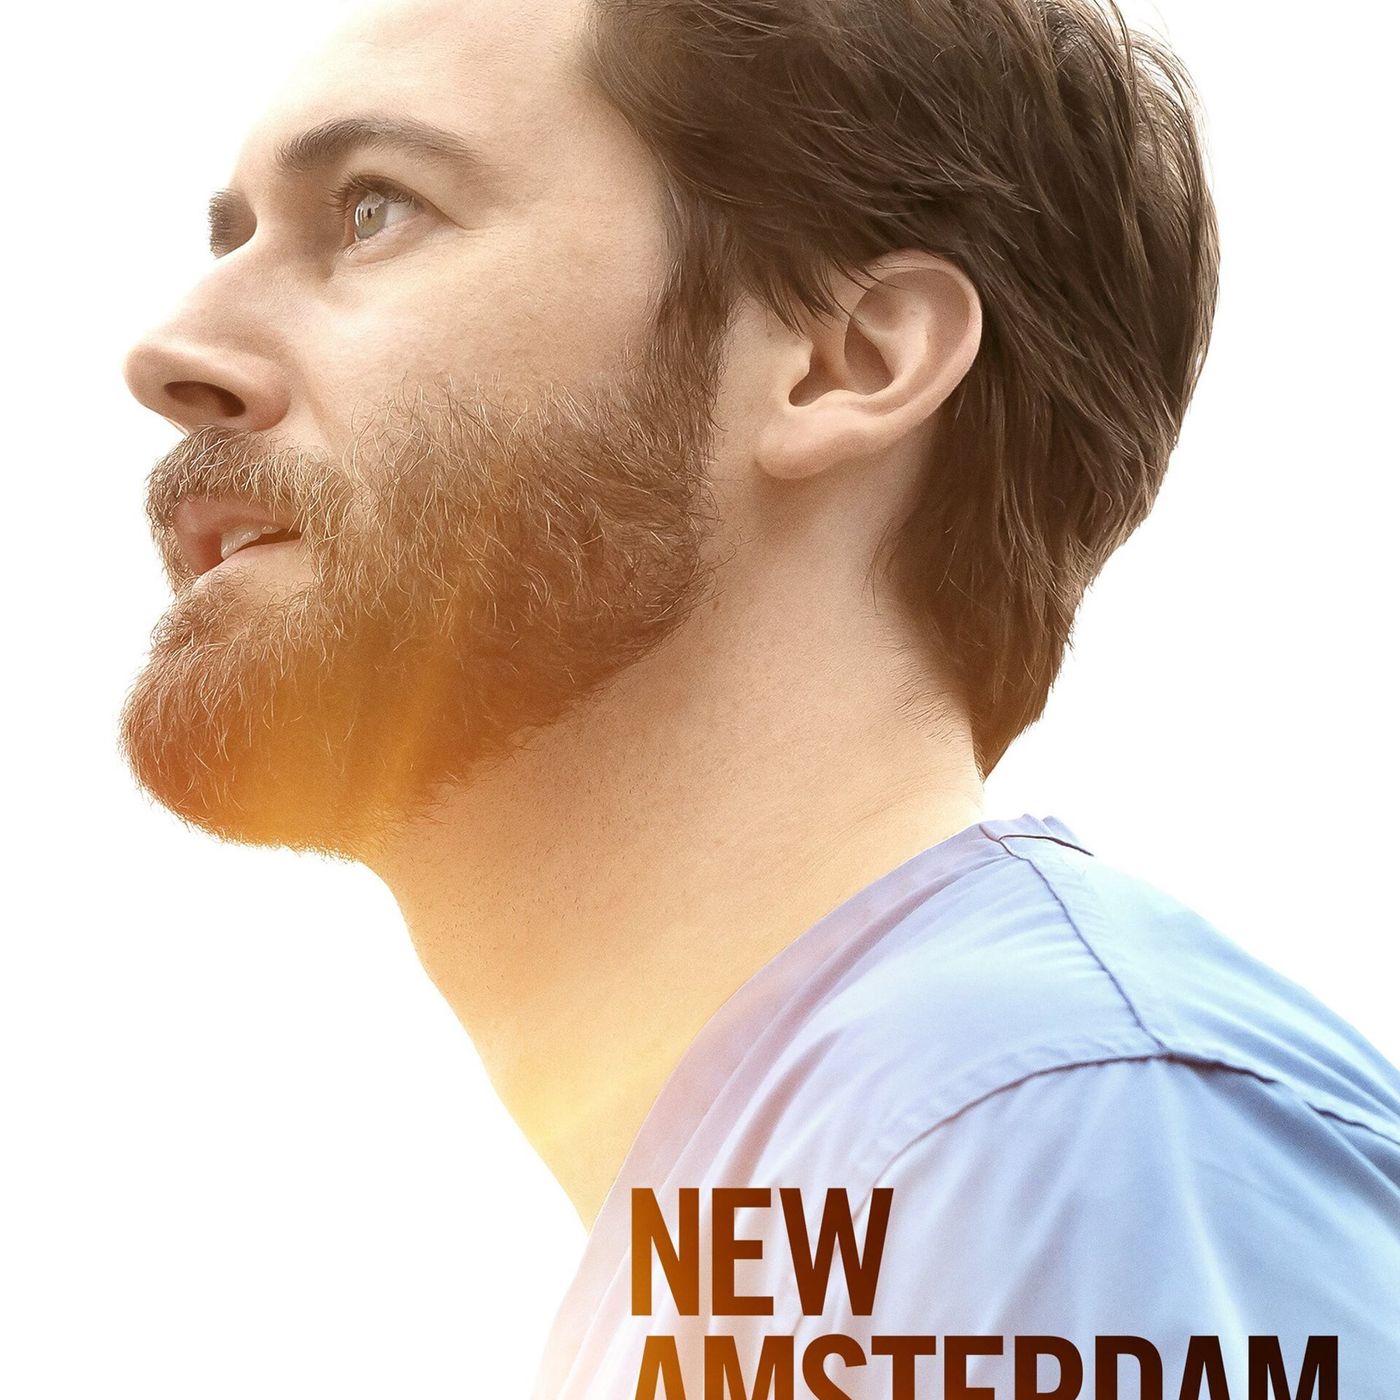 TV Show New Amsterdam and Covid-19